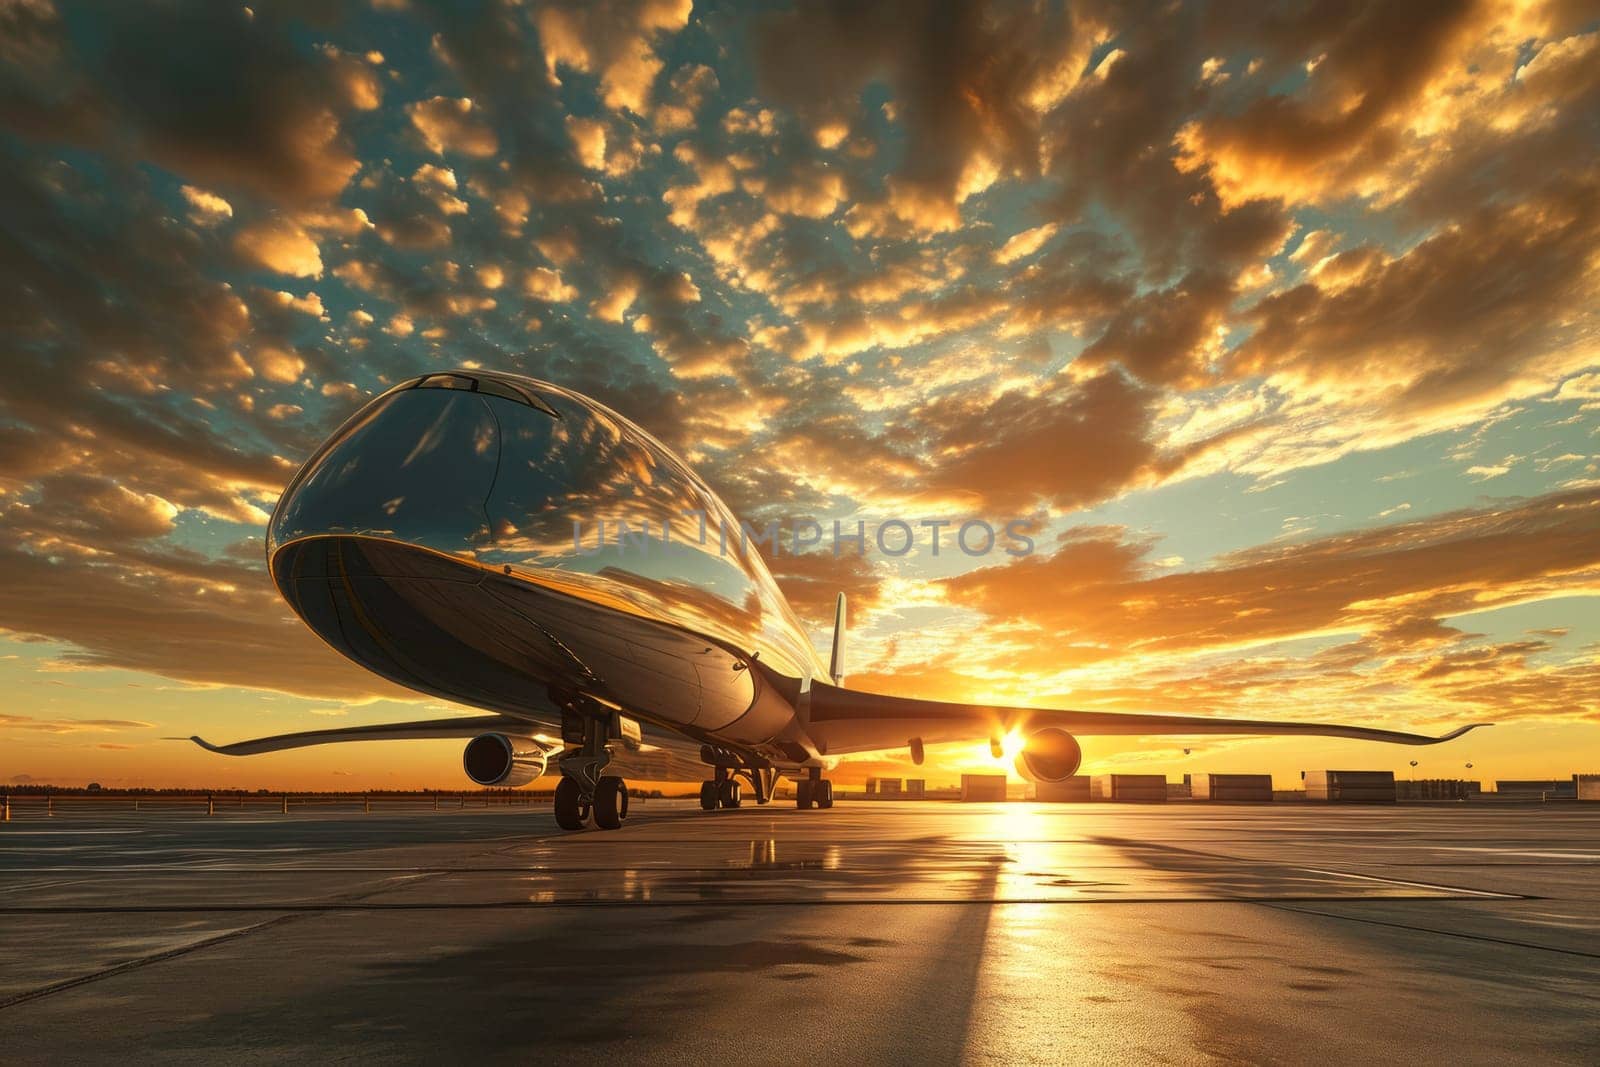 Futuristic commercial cargo air freight airplane at airport in background of beutiful sunset